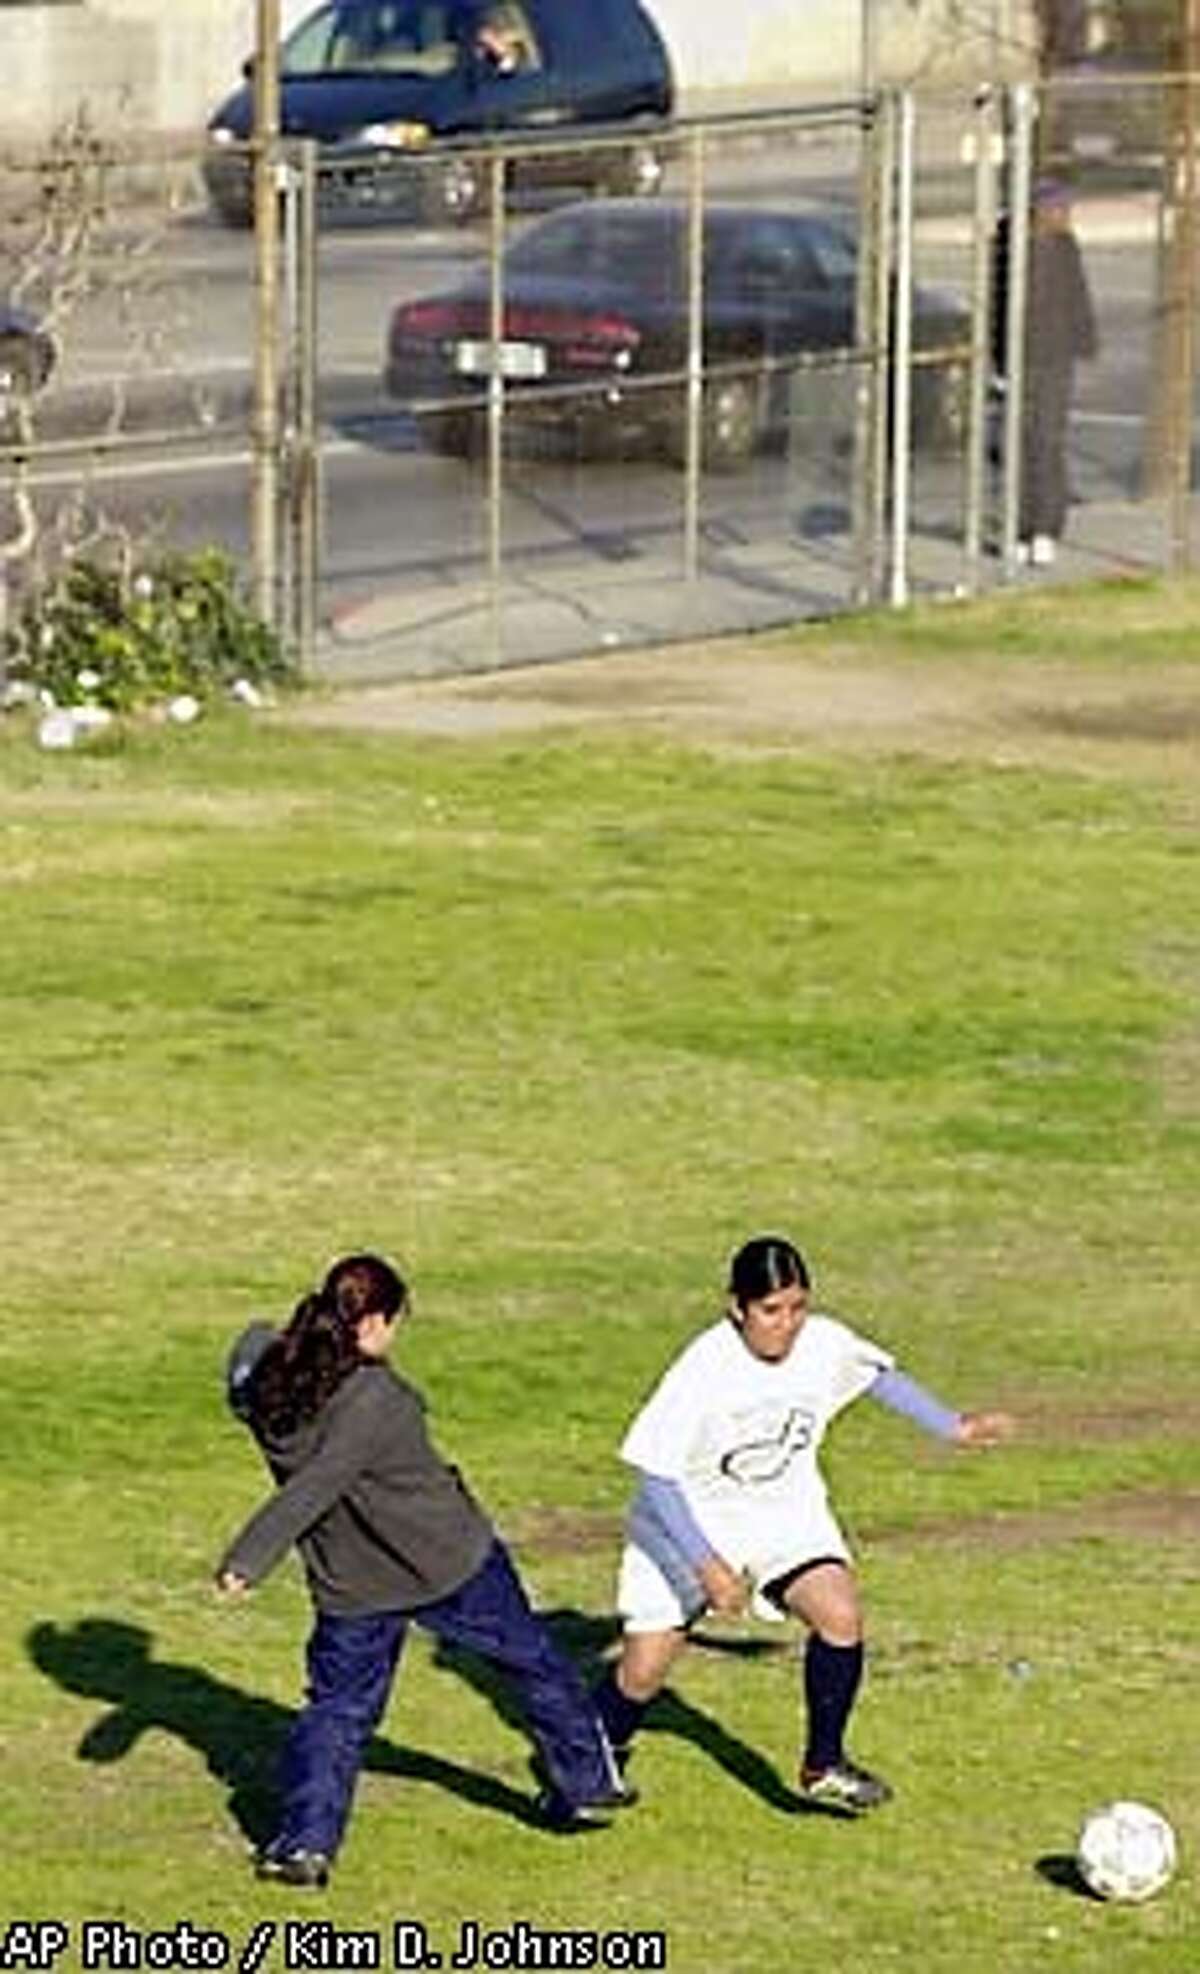 Students on the Huntington Park High School girls soccer team practice Thursday, Jan. 31, 2002 on one of the school's fields next to a busy street in Huntington Park, Calif. In California's smoggiest communities, the most athletic children are three times more likely than their couch-potato peers to get asthma, University of Southern California researchers have concluded. (AP Photo/Kim D. Johnson)